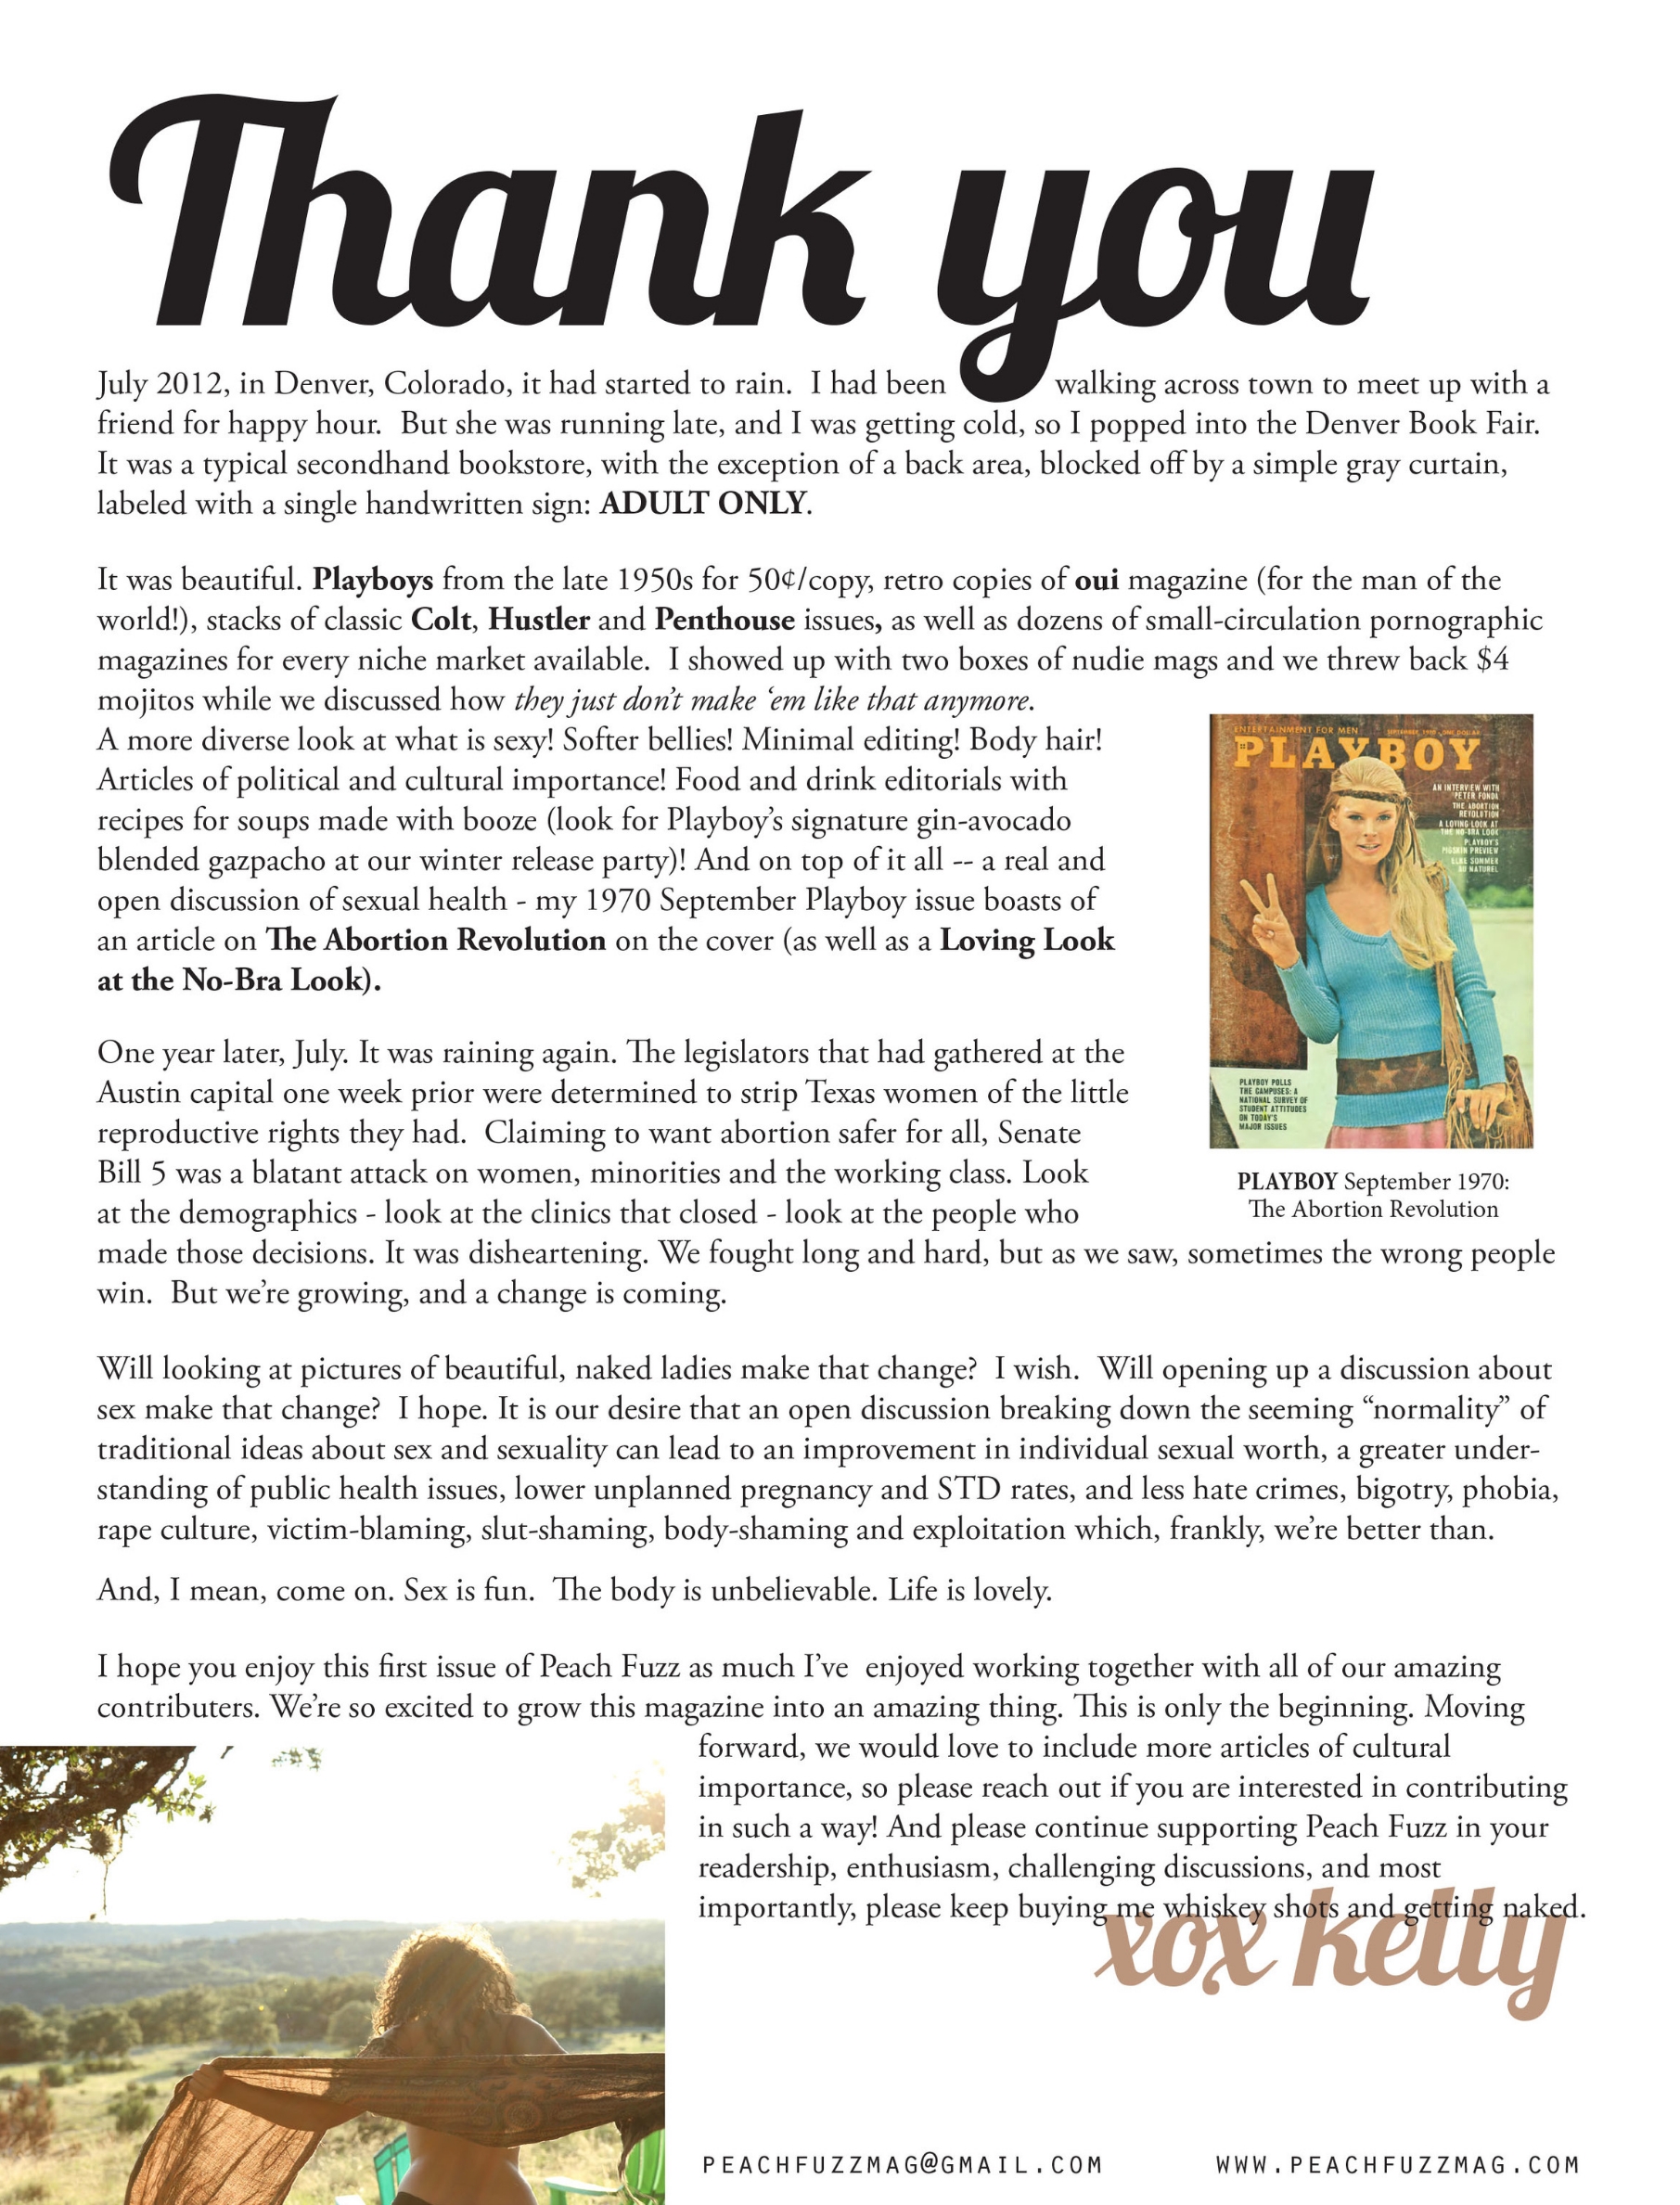 Peach Fuzz Letter from the Editor // October 2013